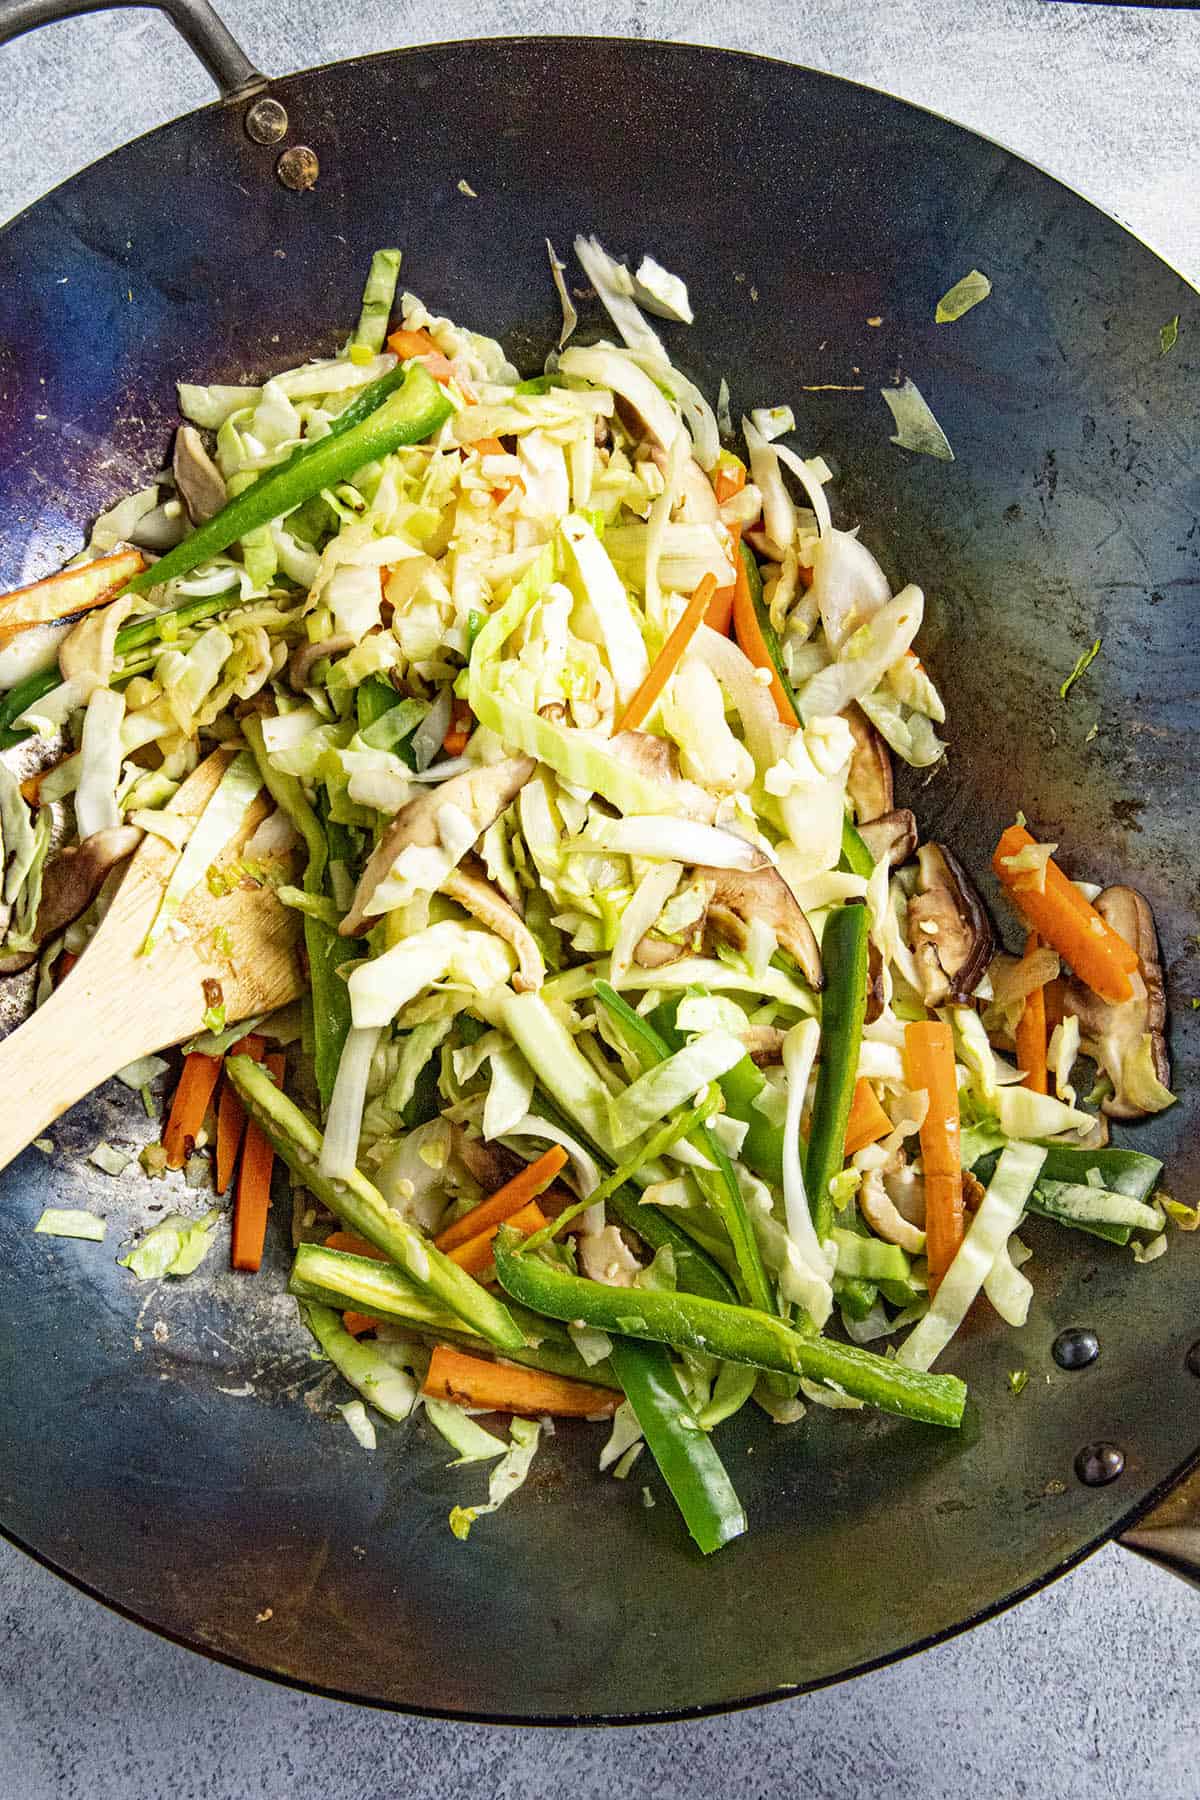 Stir frying the vegetables in the hot wok